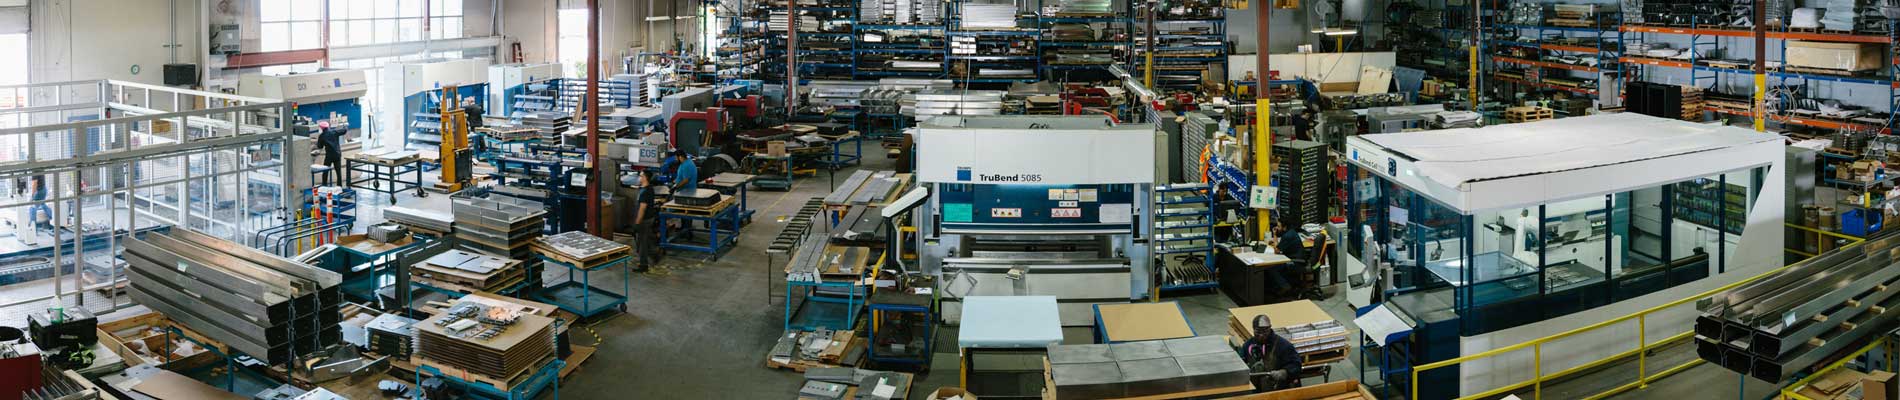 Wesgar's Certifications banner image: bird's eye view of a sheet metal manufacturing warehouse with various machines and people shown